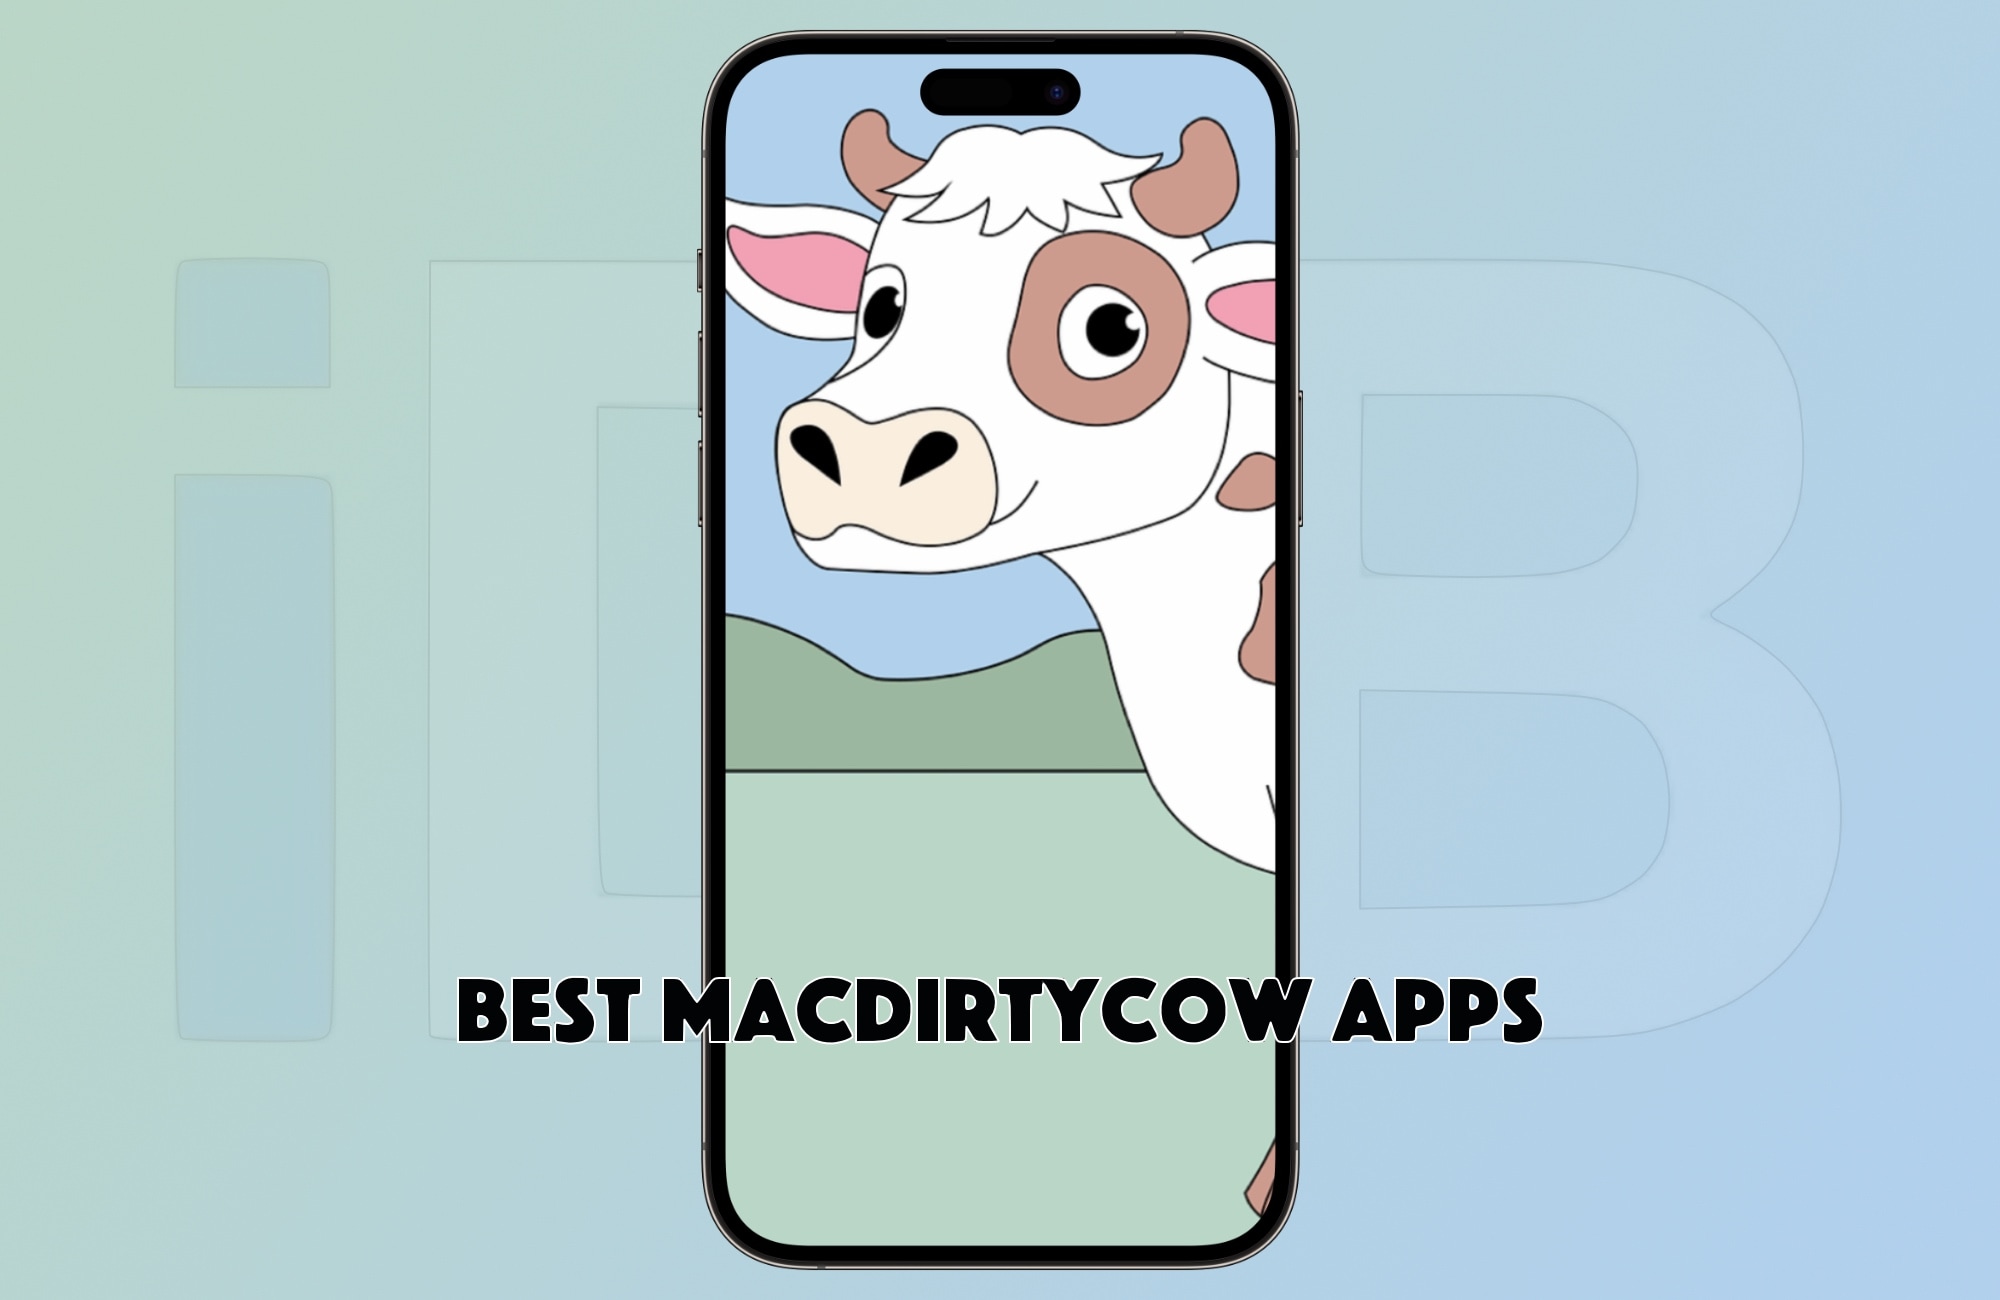 Some of the best MacDirtyCow bug-compatible apps for iOS 15.x-16.1.2